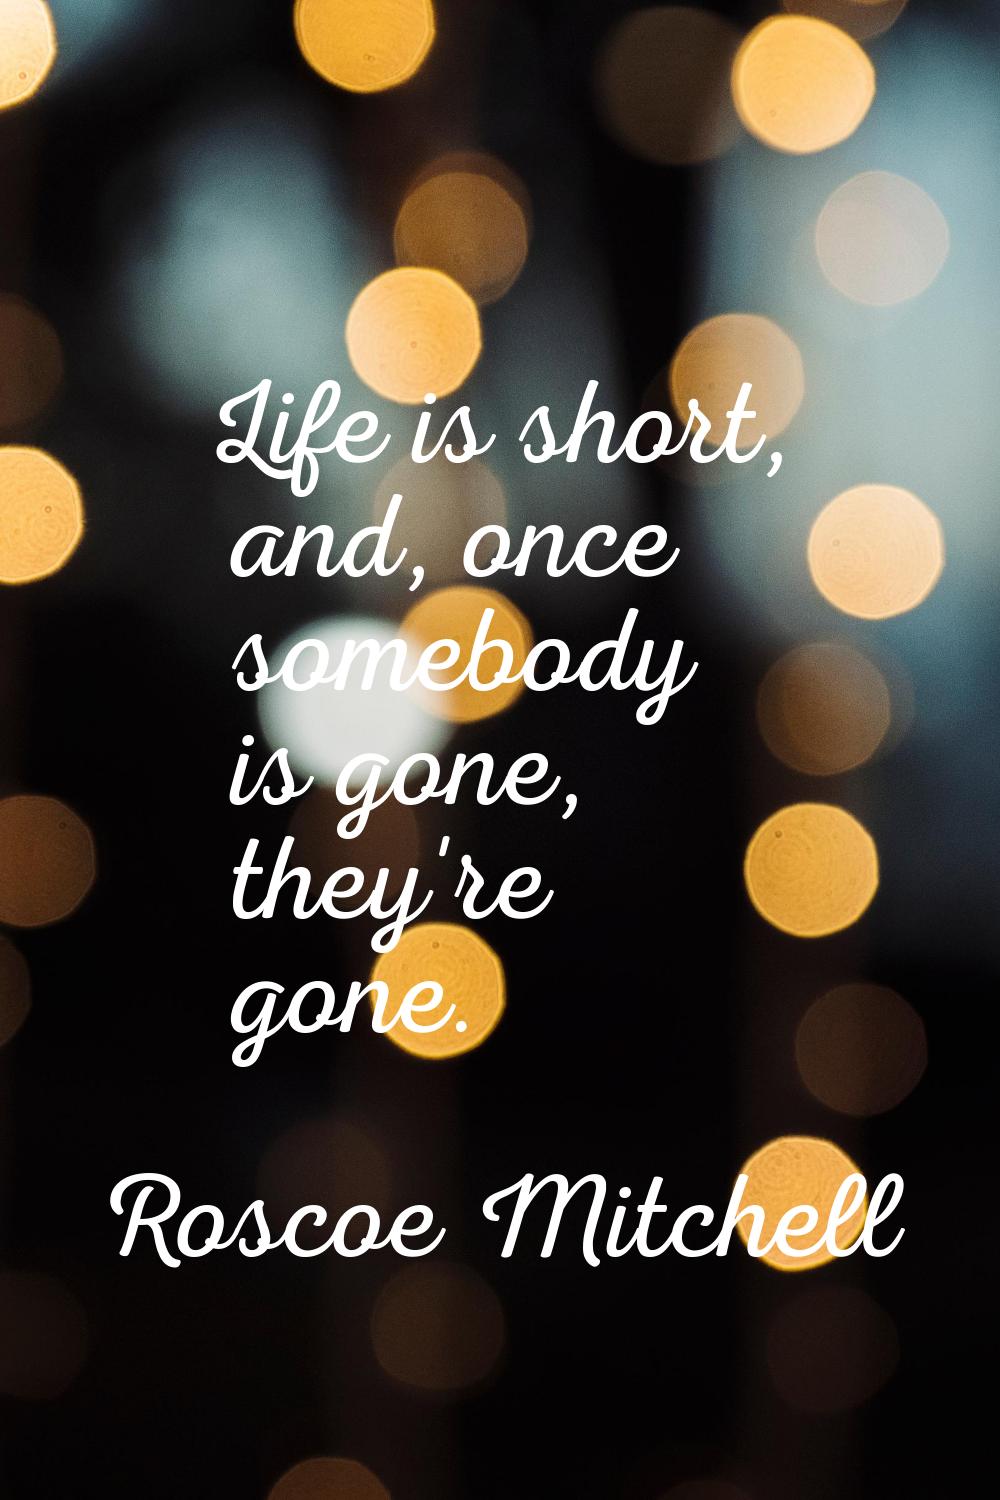 Life is short, and, once somebody is gone, they're gone.